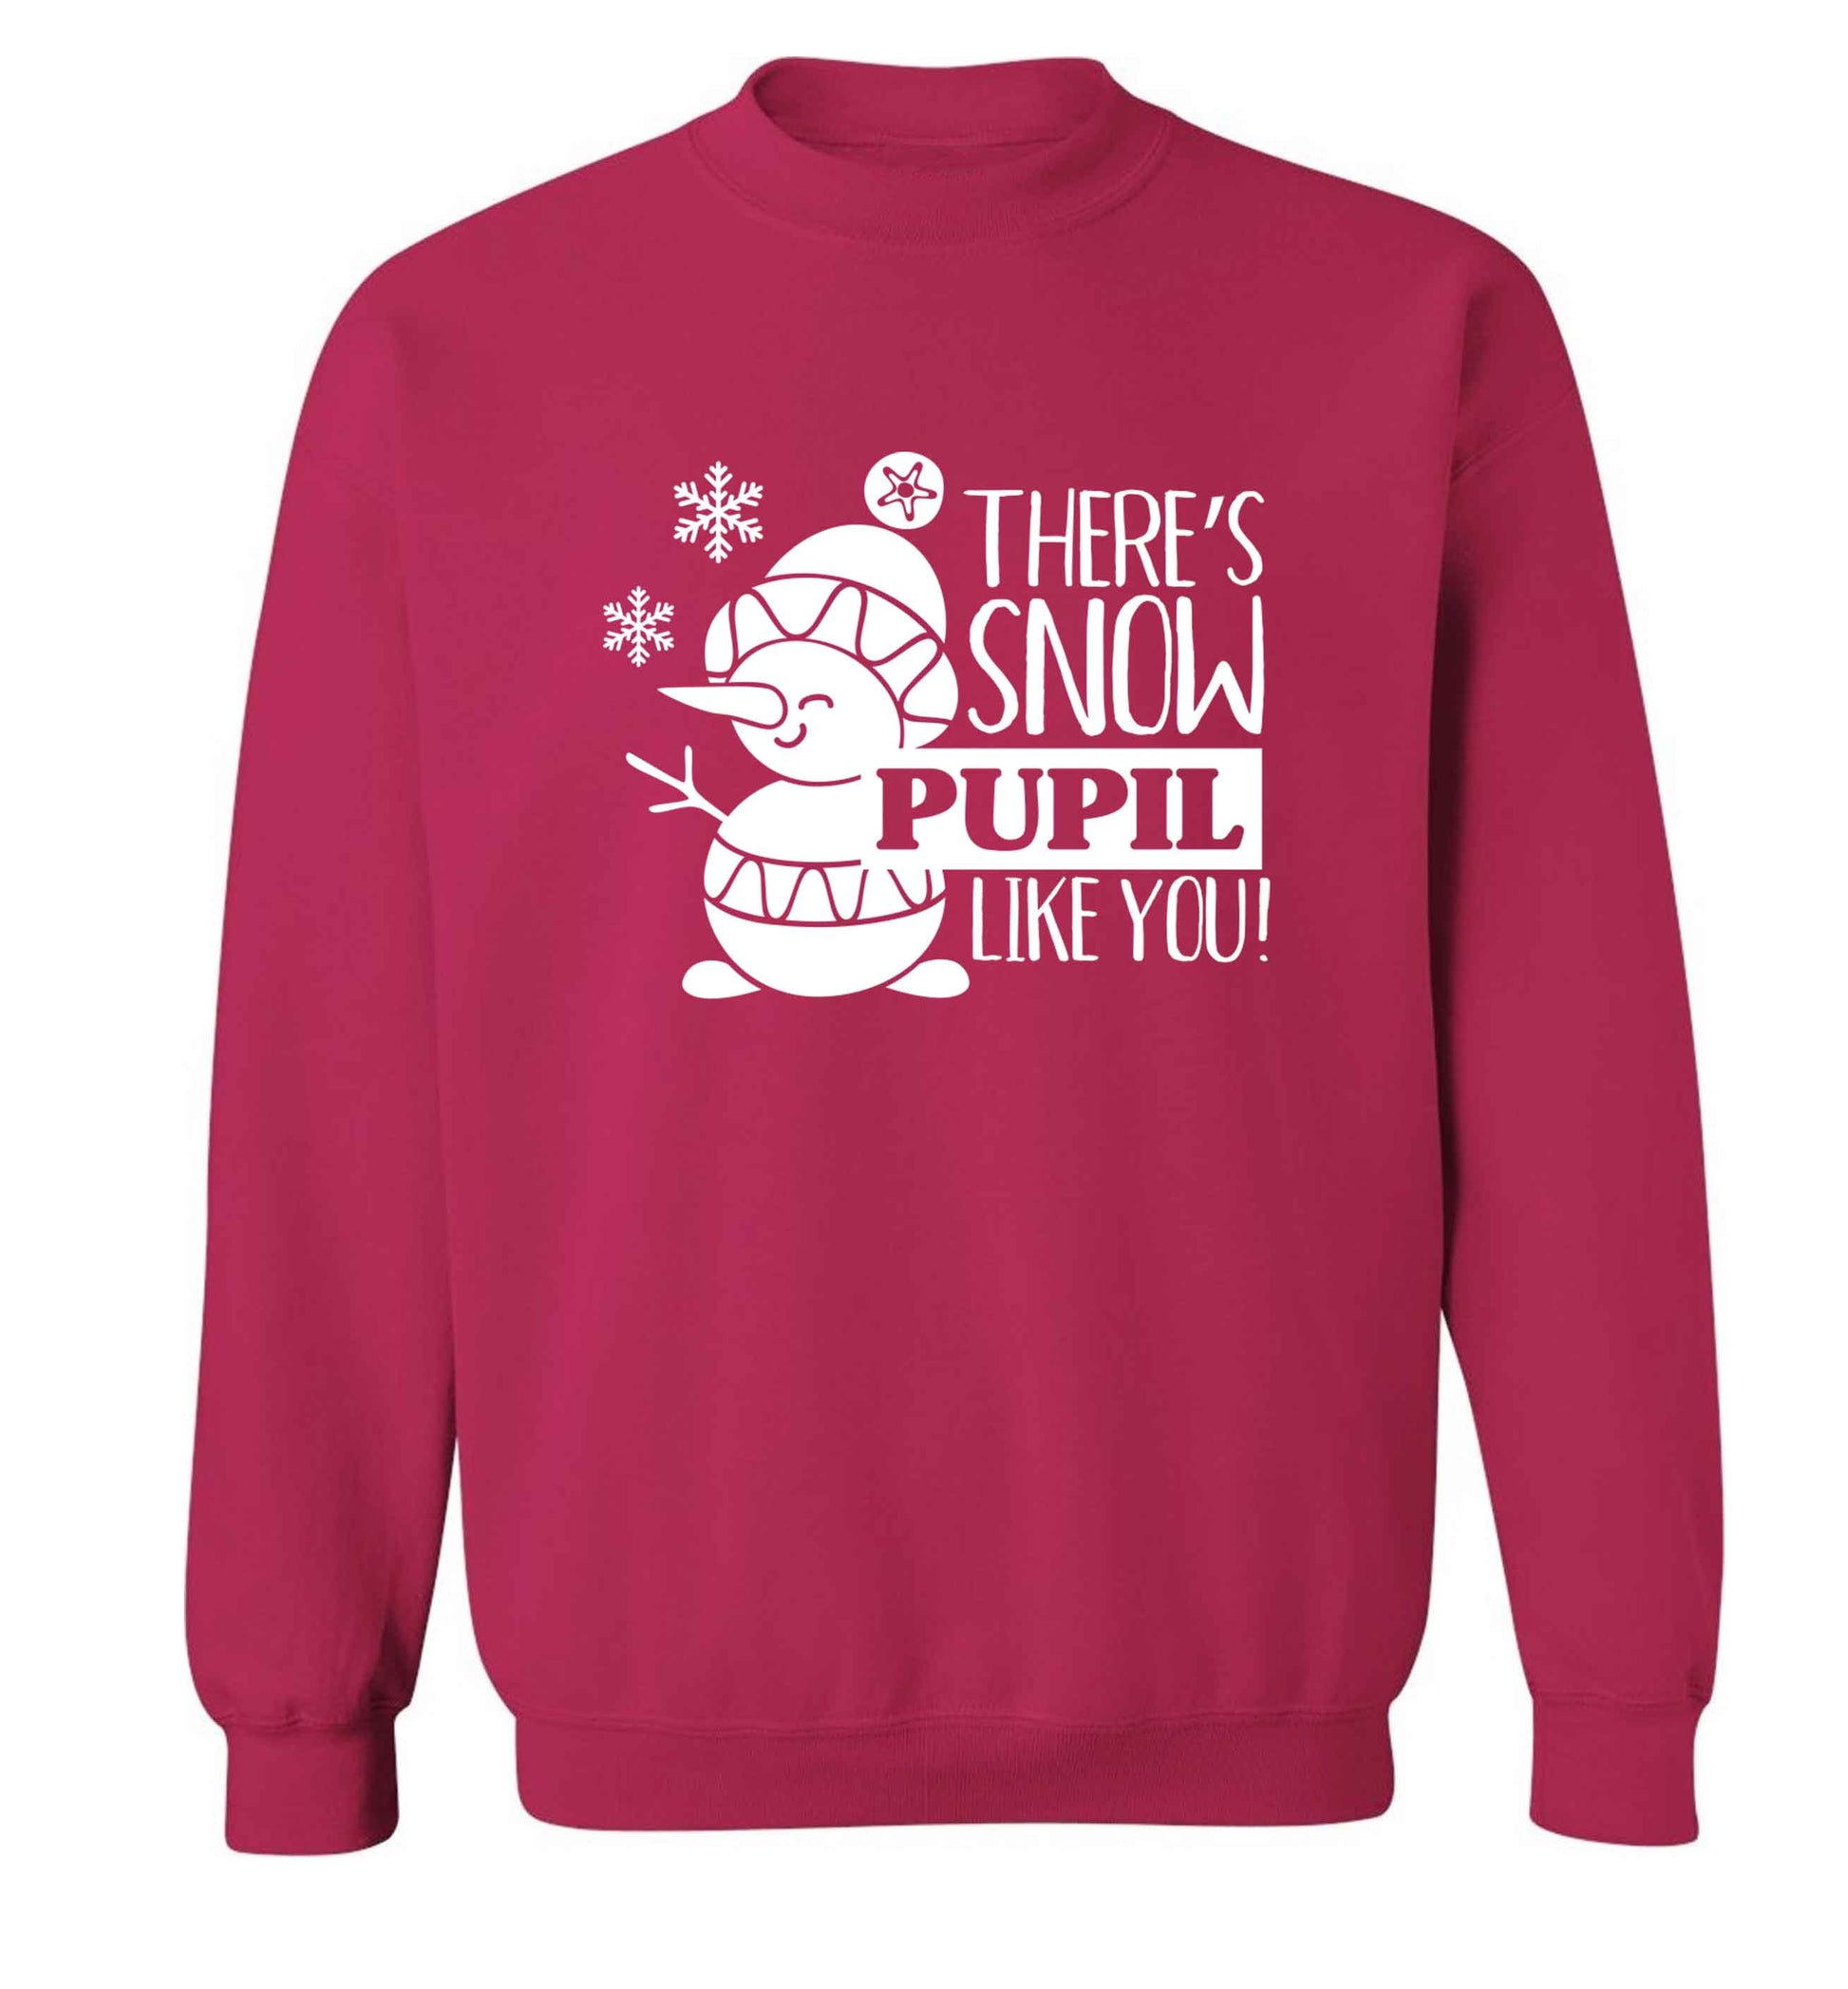 There's snow pupil like you adult's unisex pink sweater 2XL